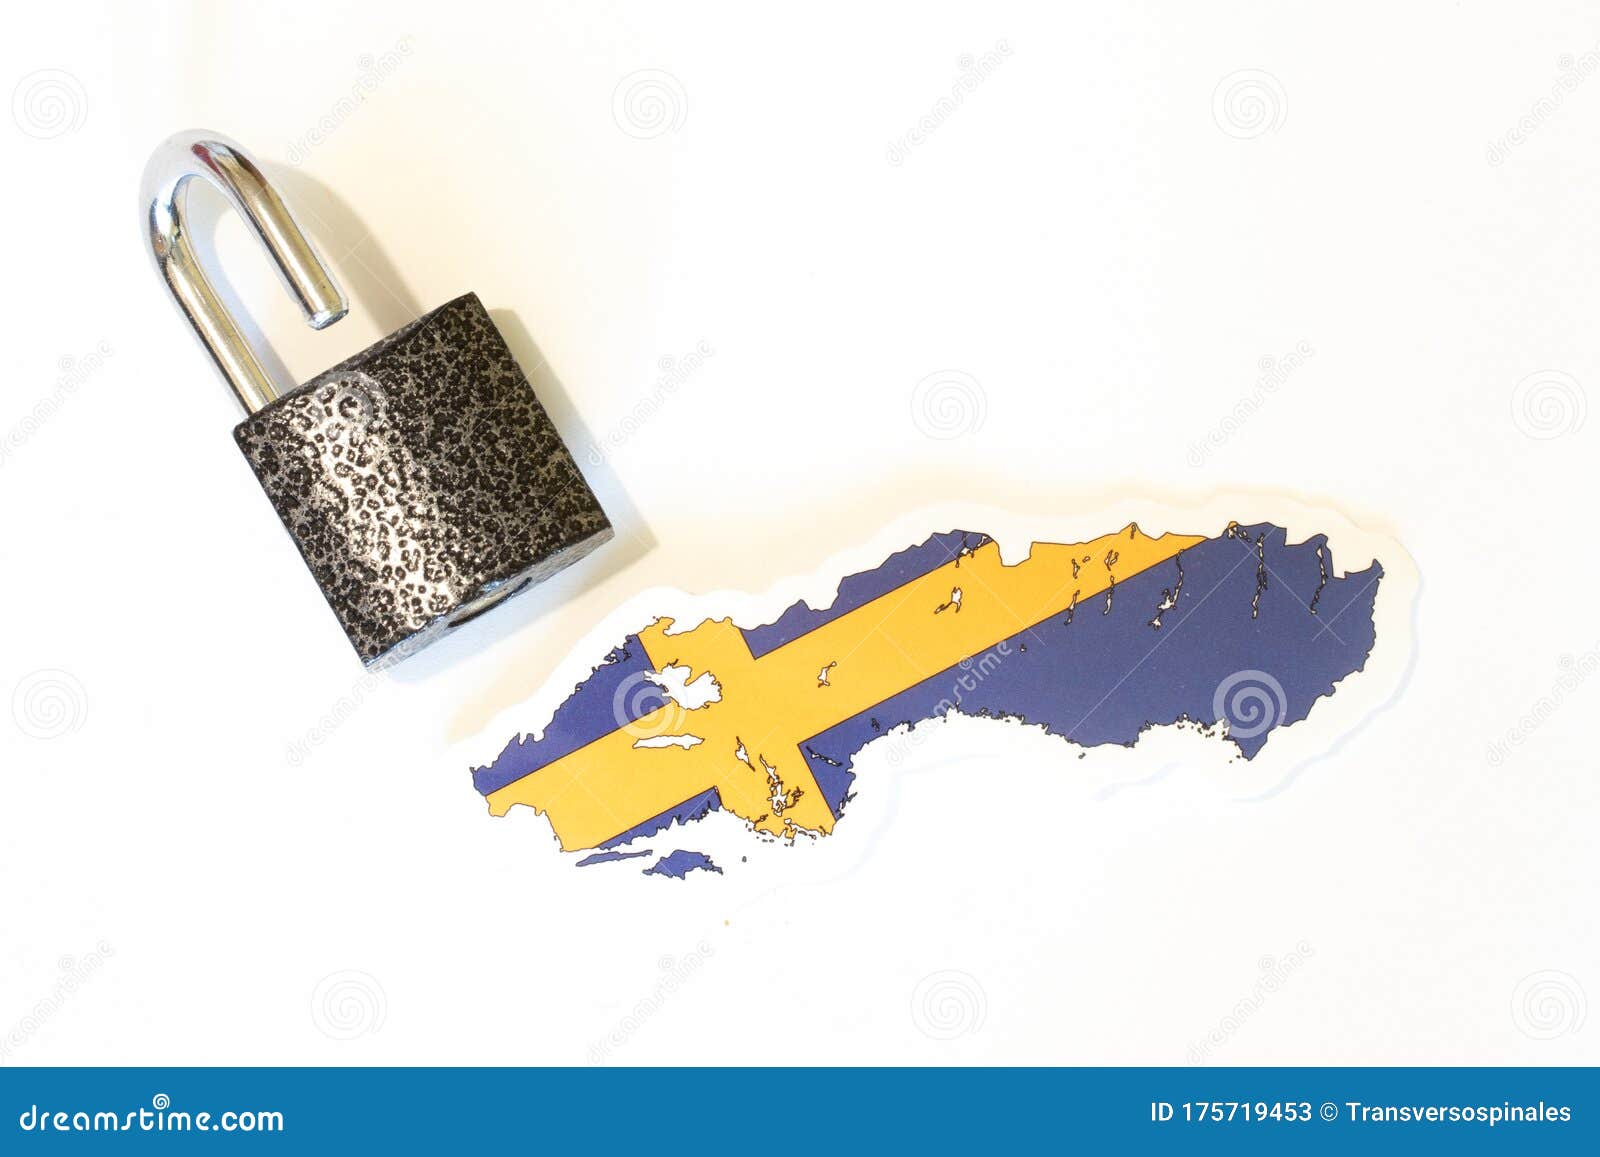 Sweden National Flag with Outline on White Background with Open Lock ...